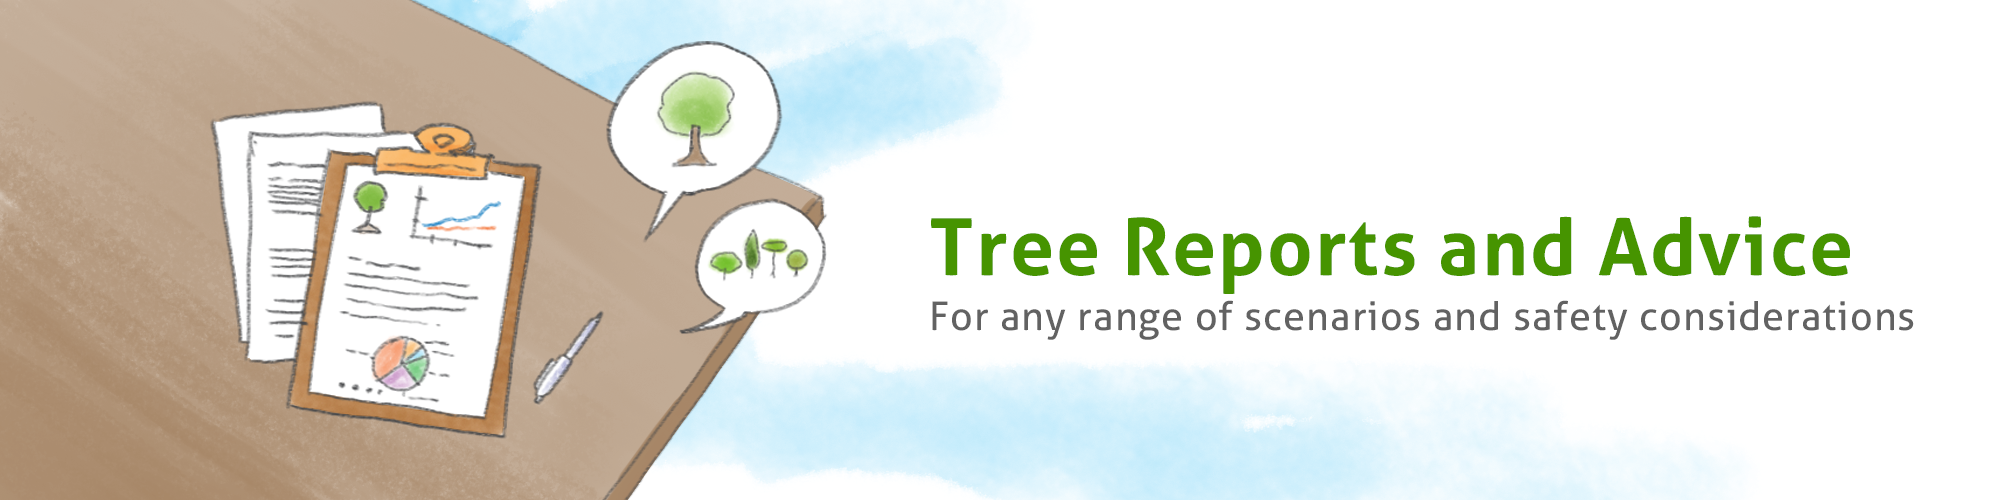 Tree Reports and Advice